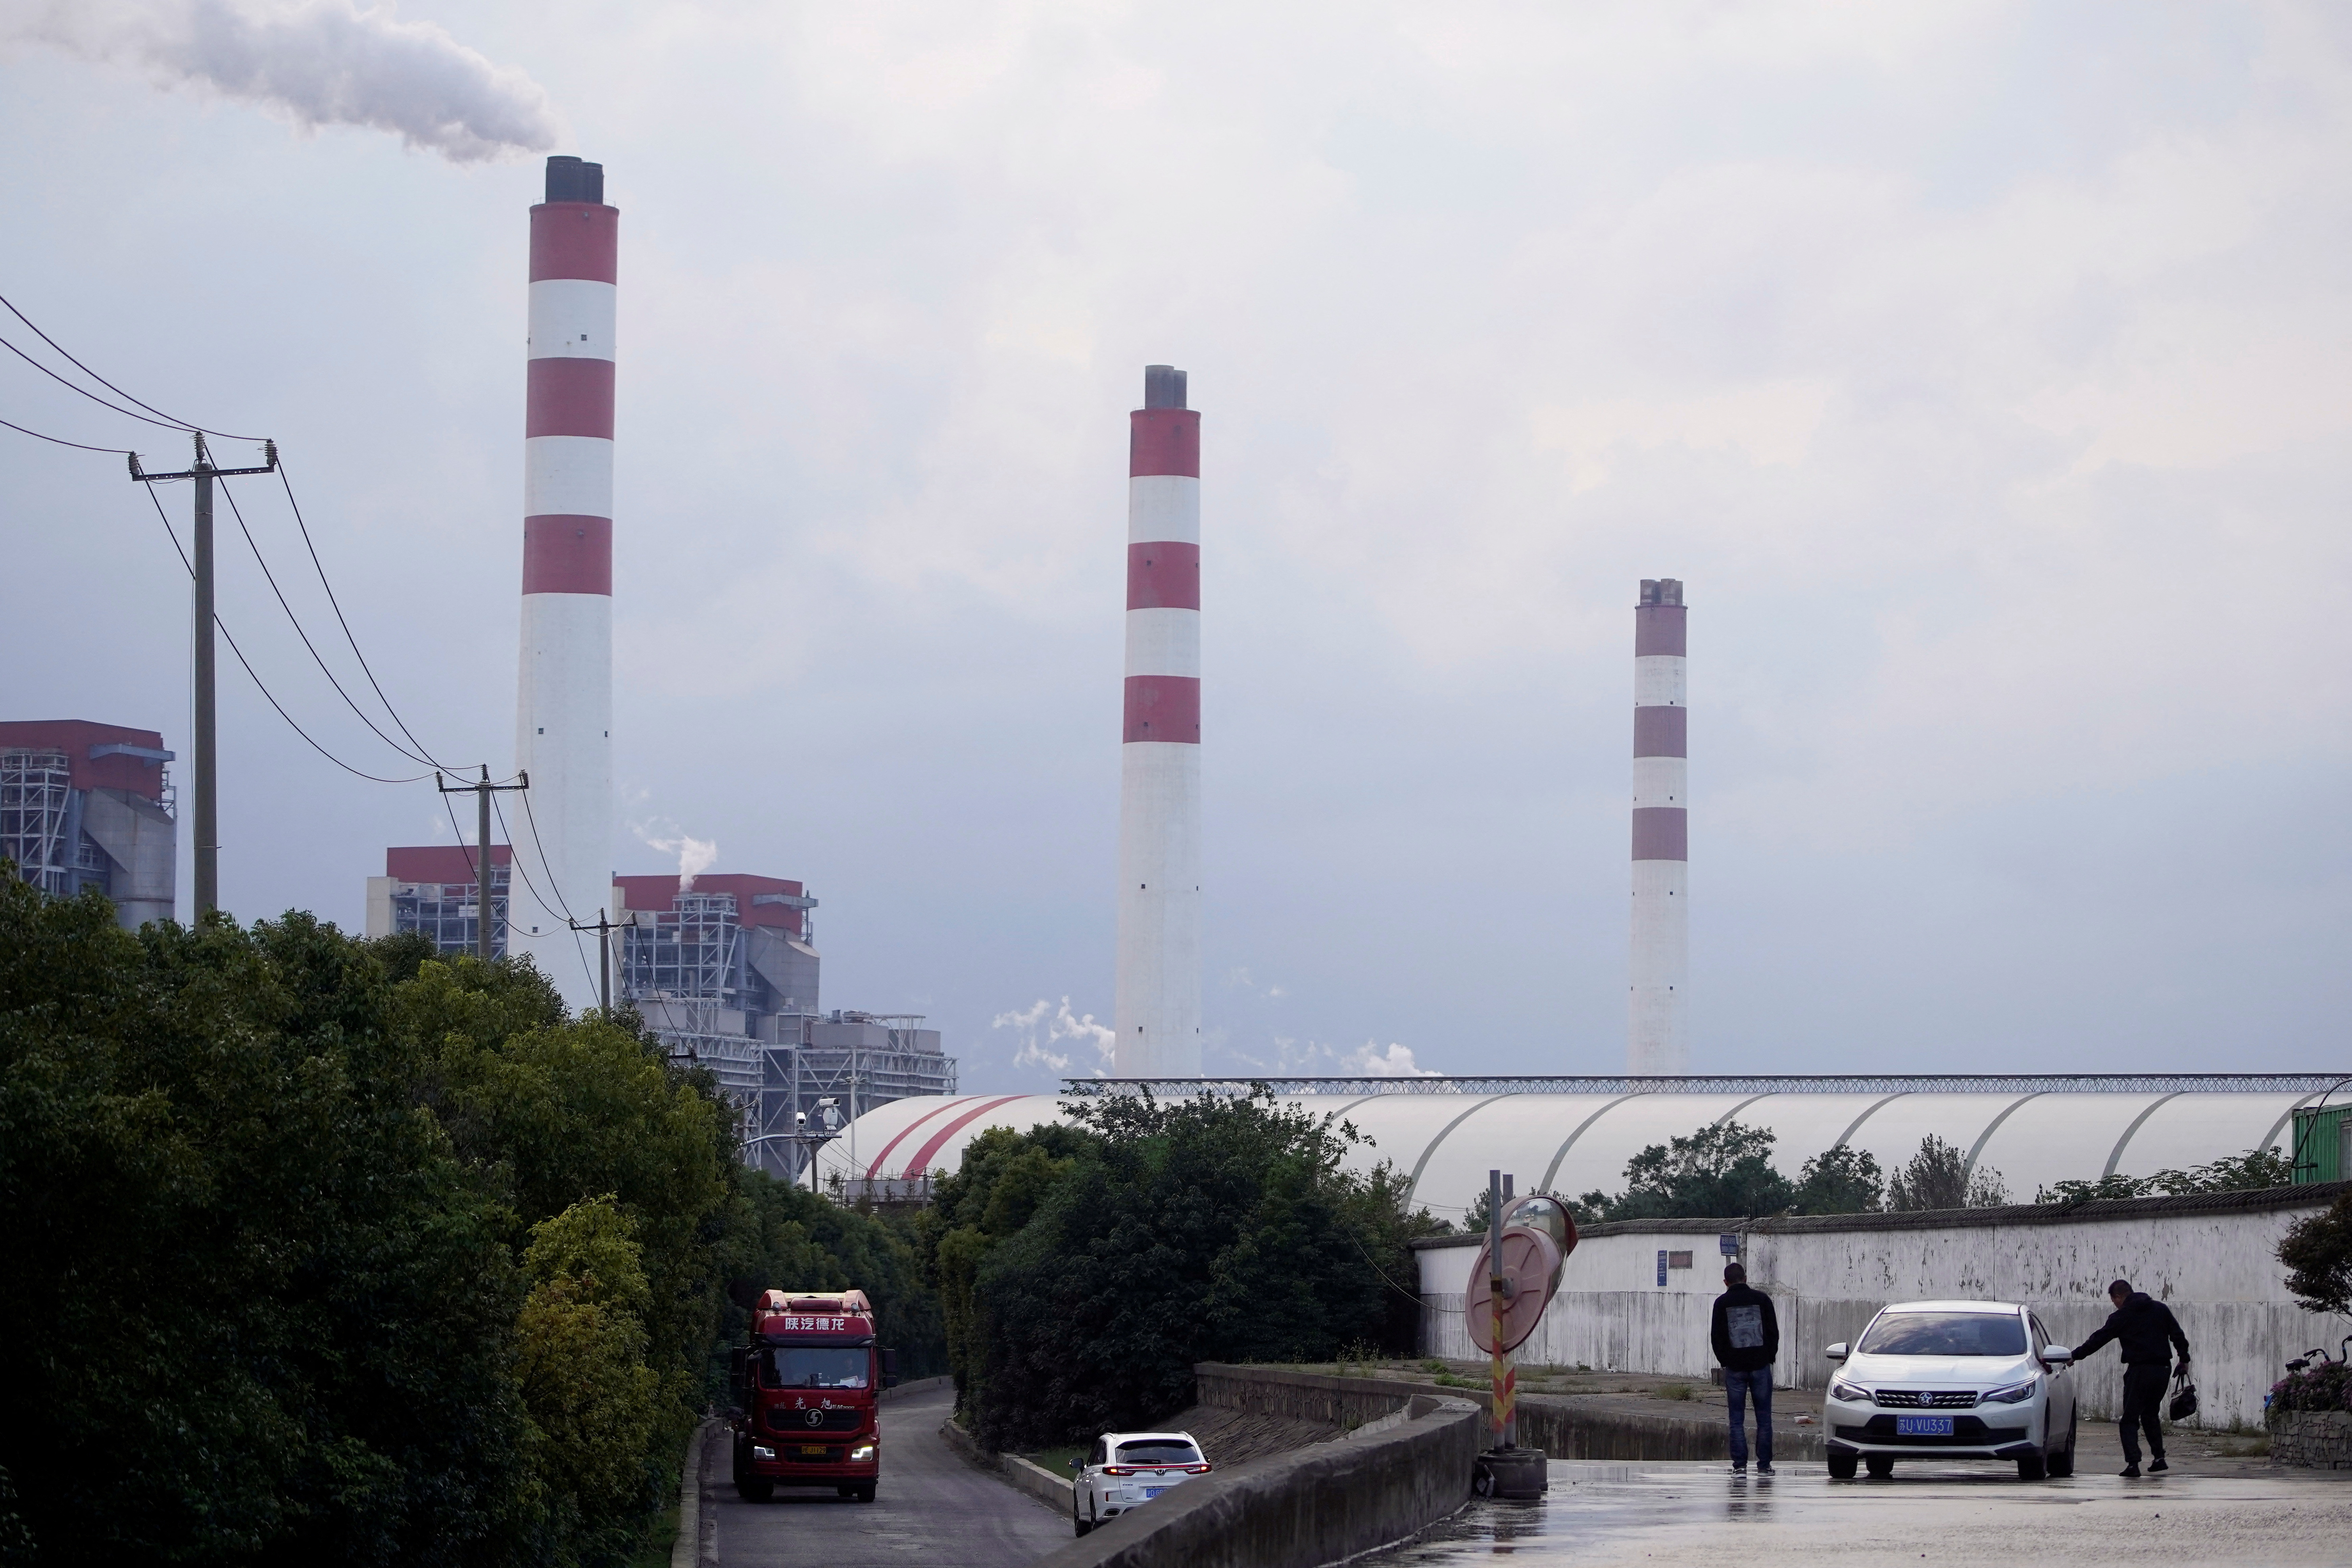 Men stand by a car near a coal-fired power plant in Shanghai